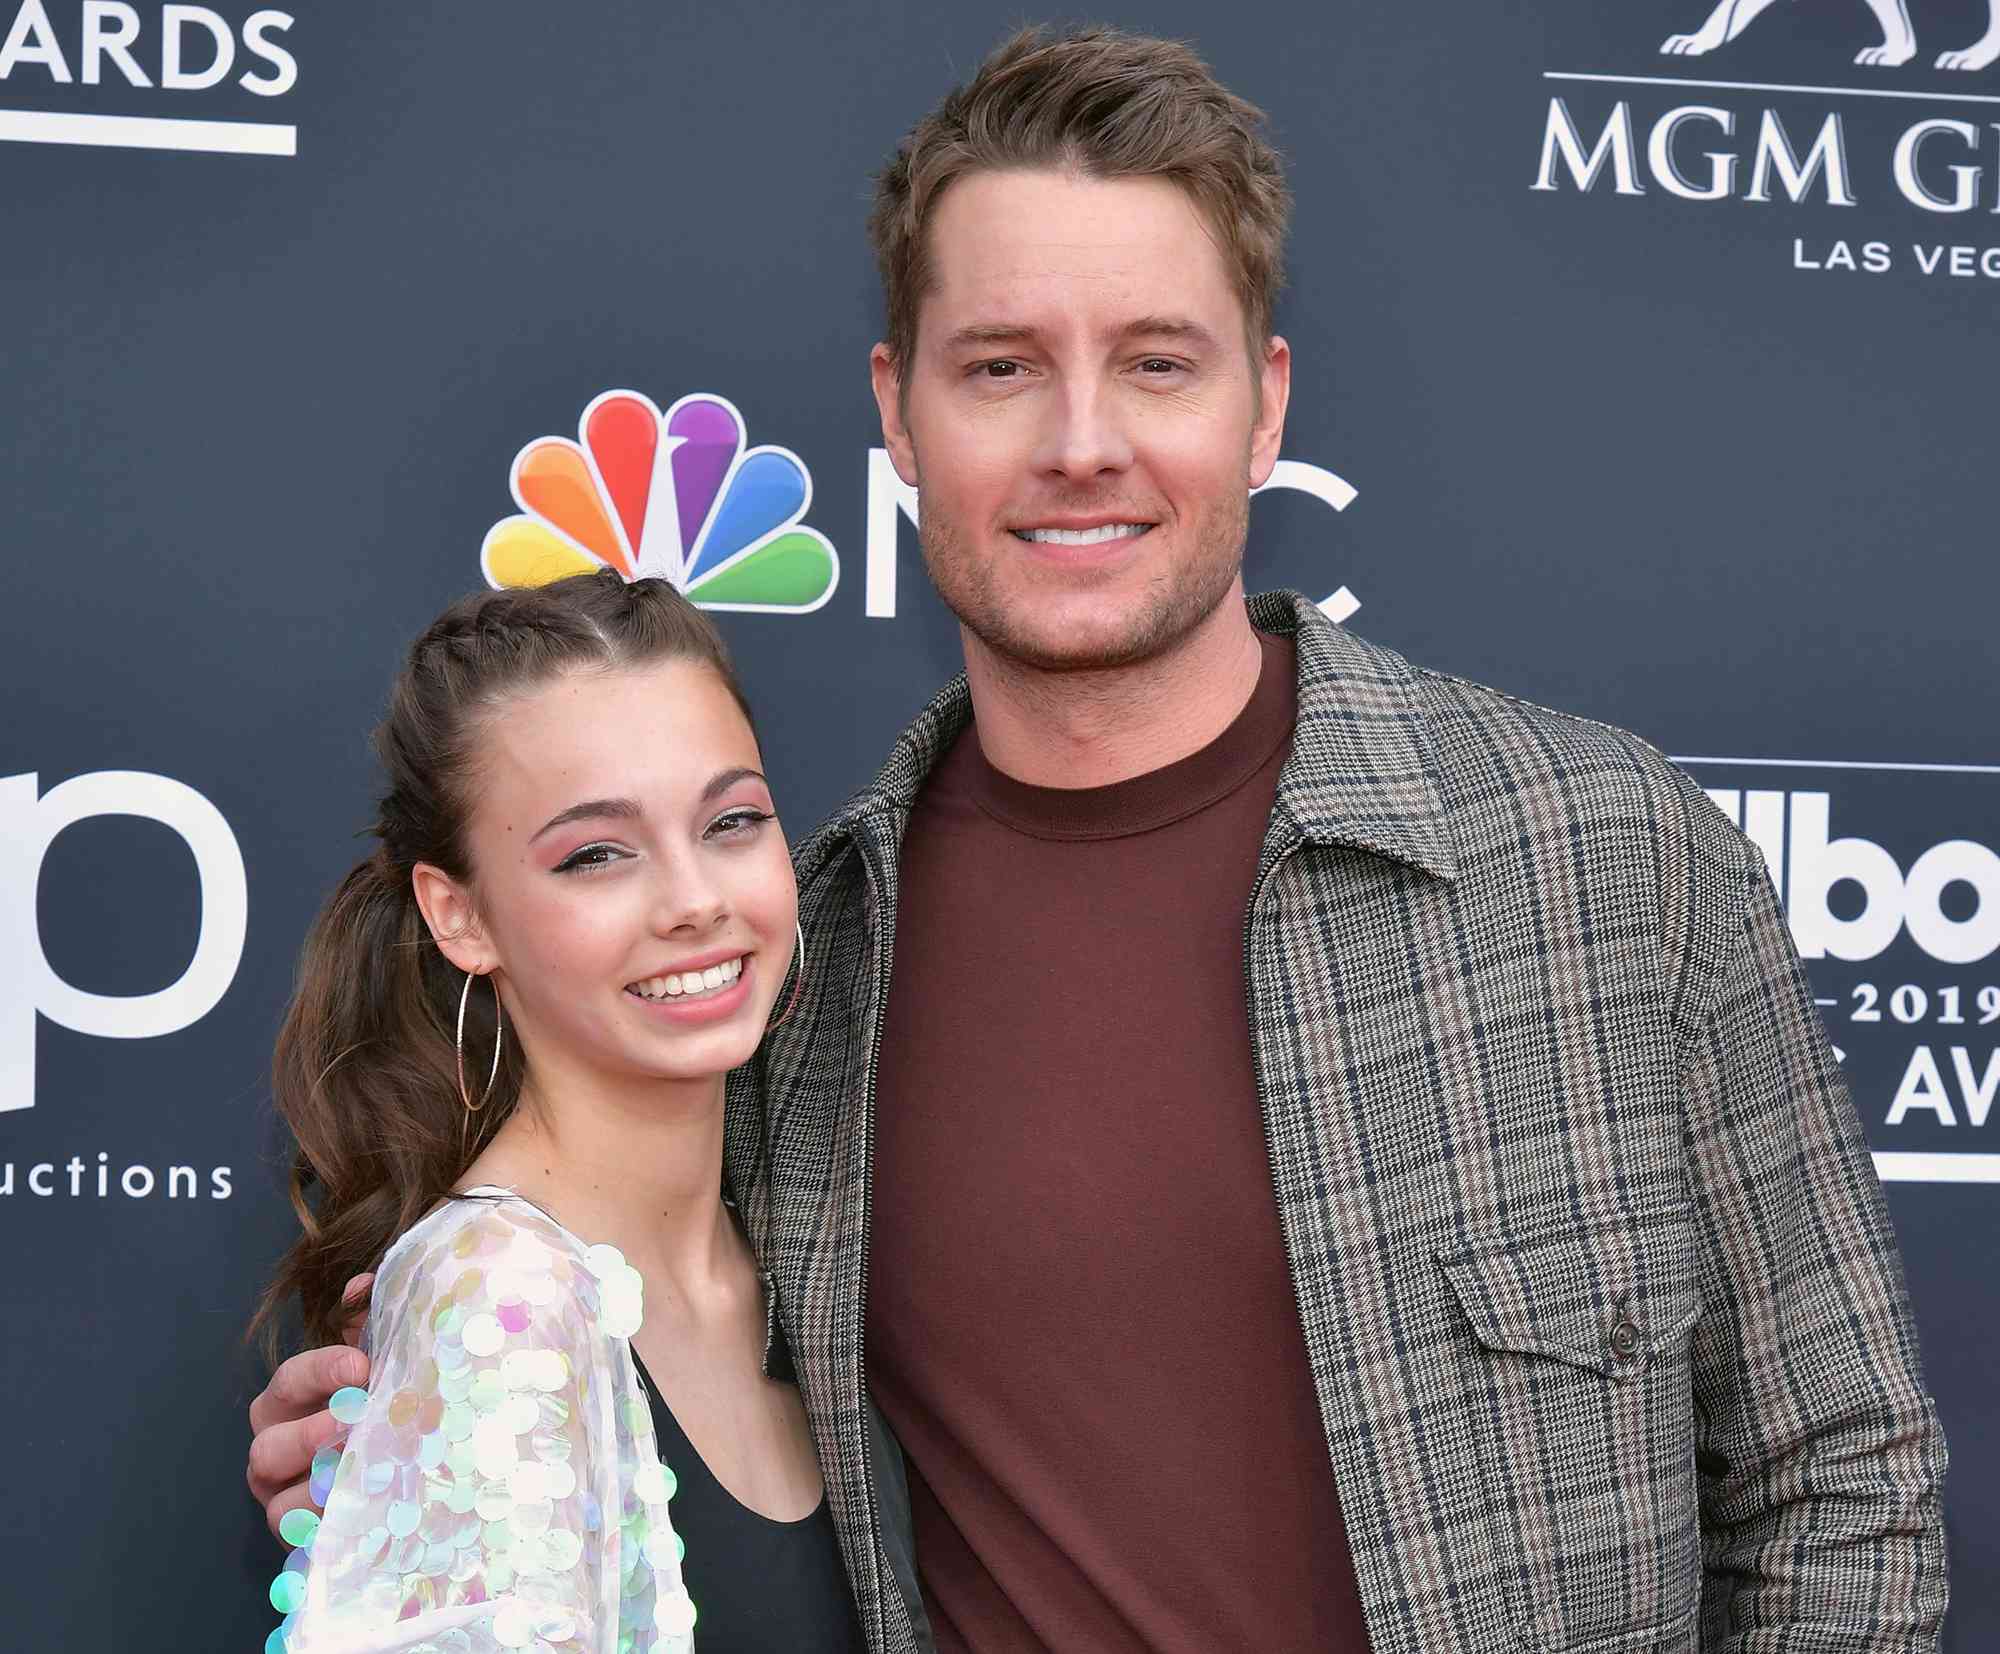 Isabella Justice Hartley and Justin Hartley attend the 2019 Billboard Music Awards at MGM Grand Garden Arena on May 1, 2019 in Las Vegas, Nevada